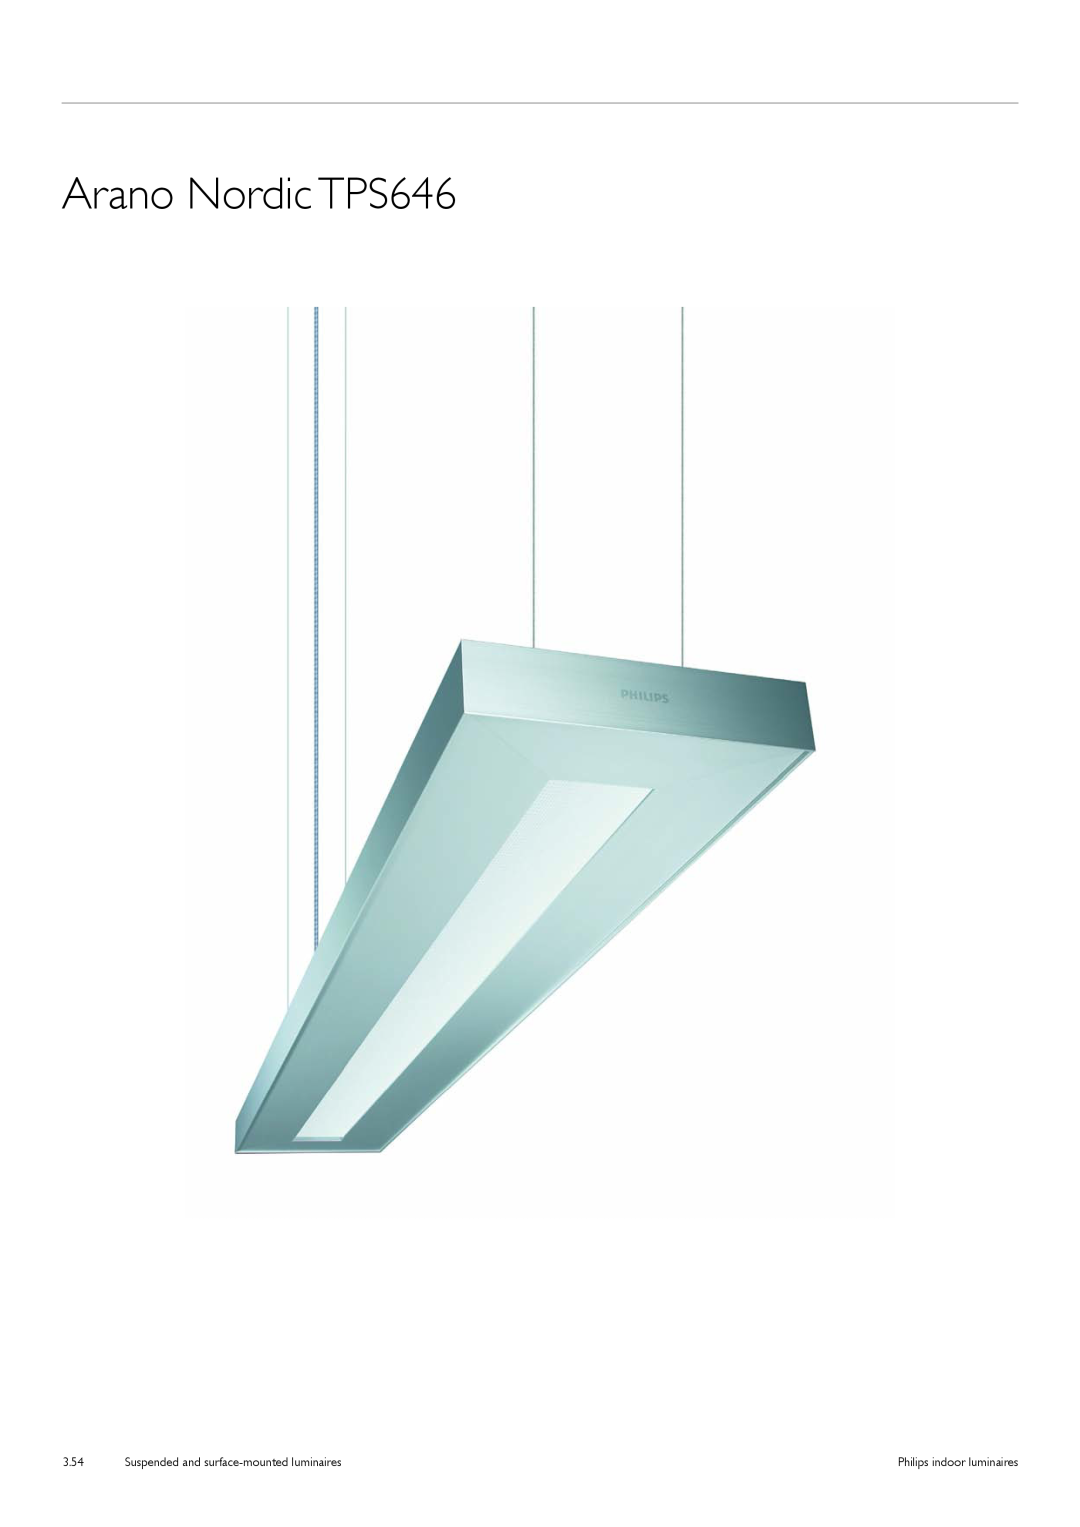 Philips TCS125 manual Arano Nordic TPS646, Suspended and surface-mountedluminaires, 3.54, Philips indoor luminaires 